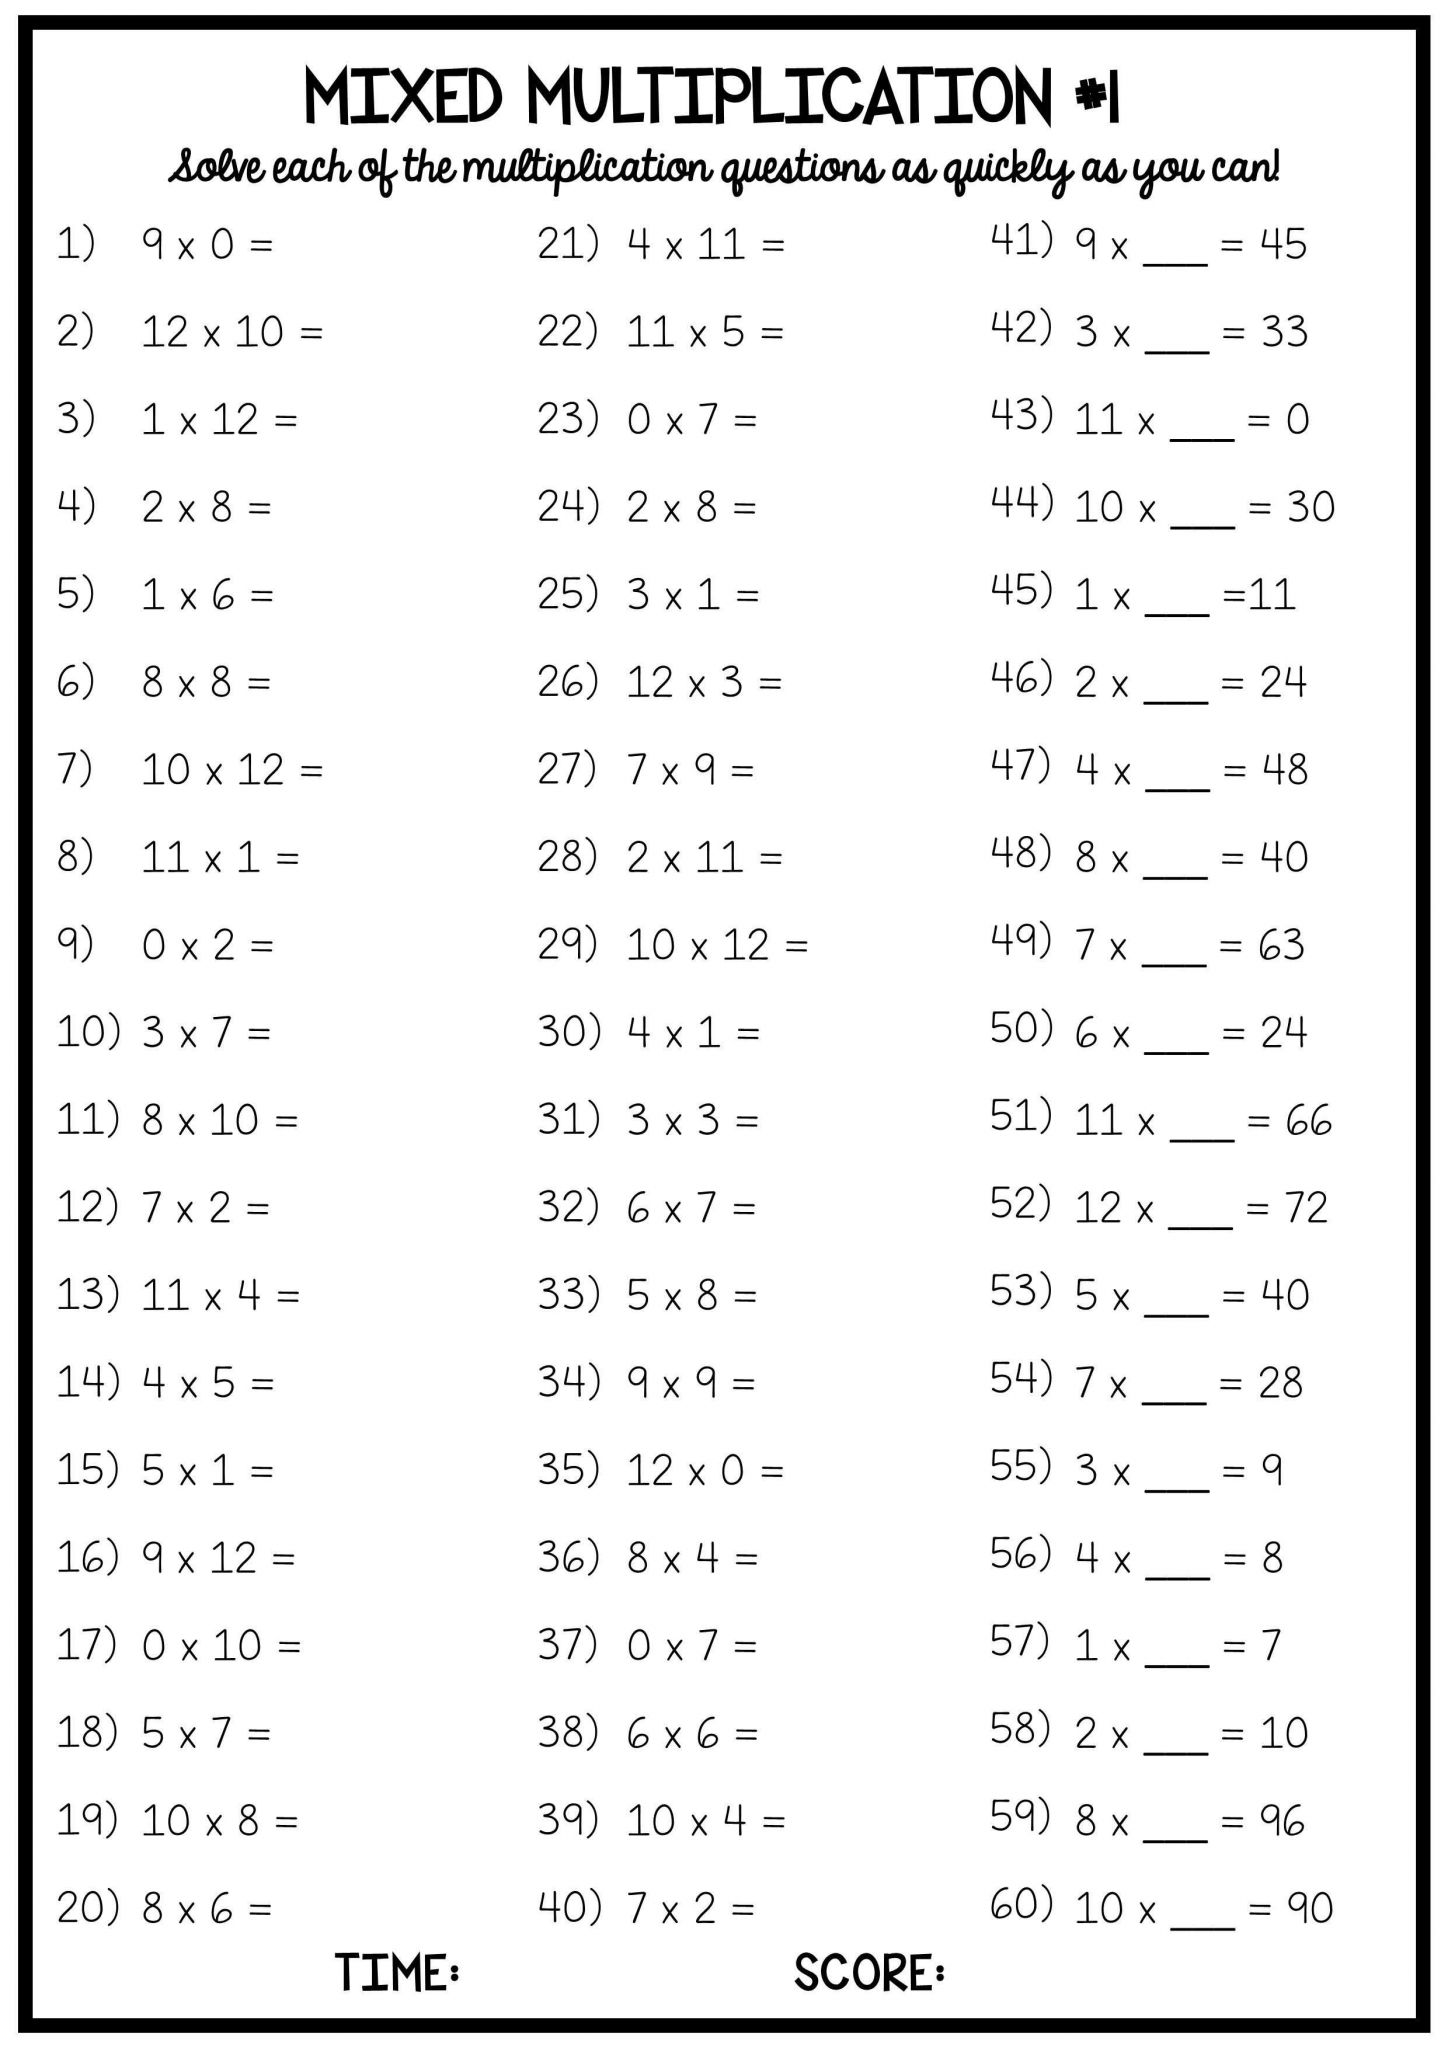 Times Tables Worksheets 1 12 Pdf or Multiplication Times Table Worksheets Mental Maths or Early